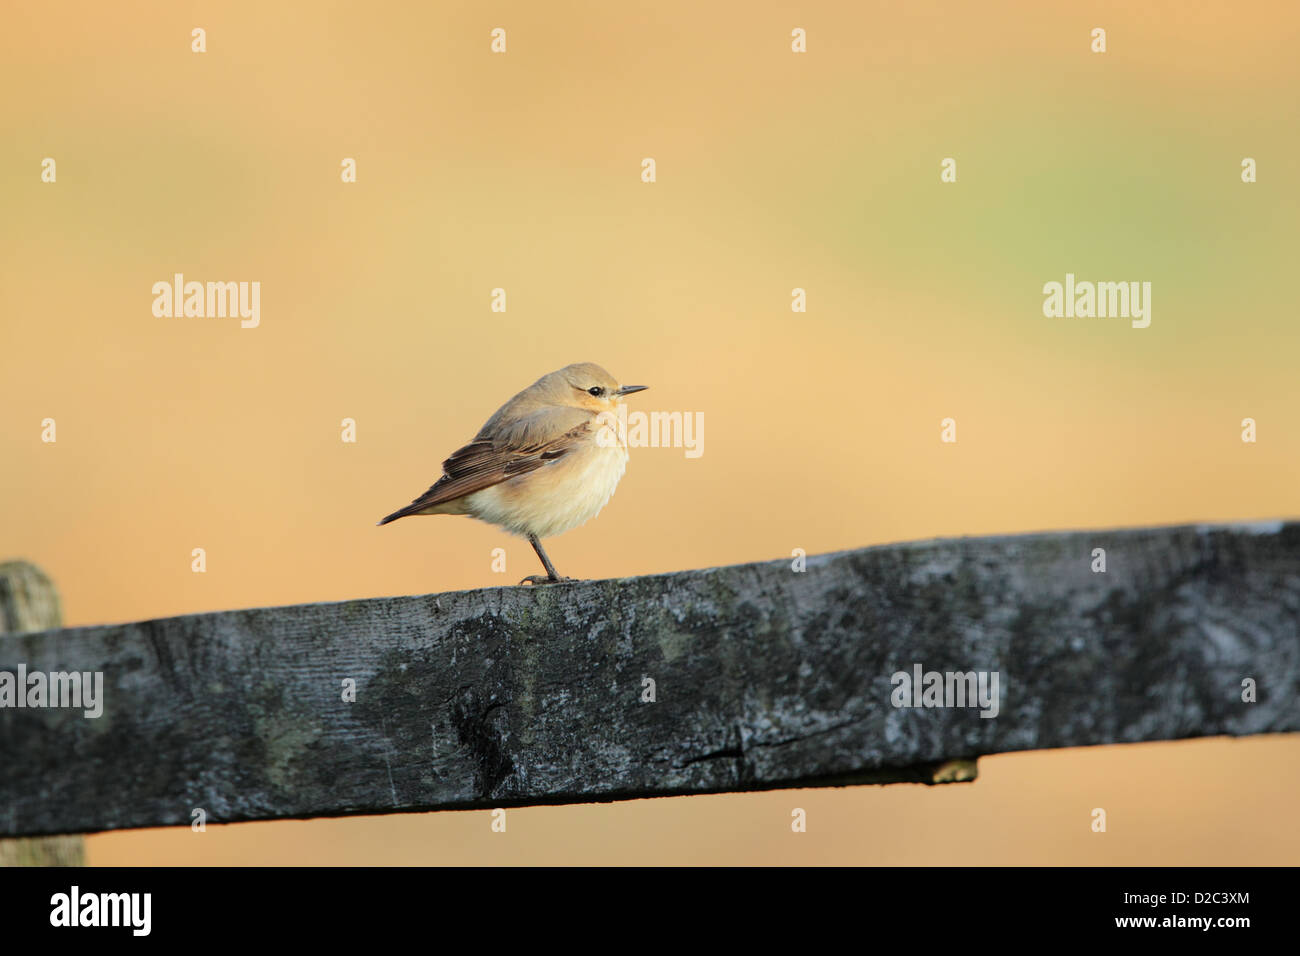 Northern wheatear (Oenanthe oenanthe) juvenile standing on top of a wooden fence rail Stock Photo